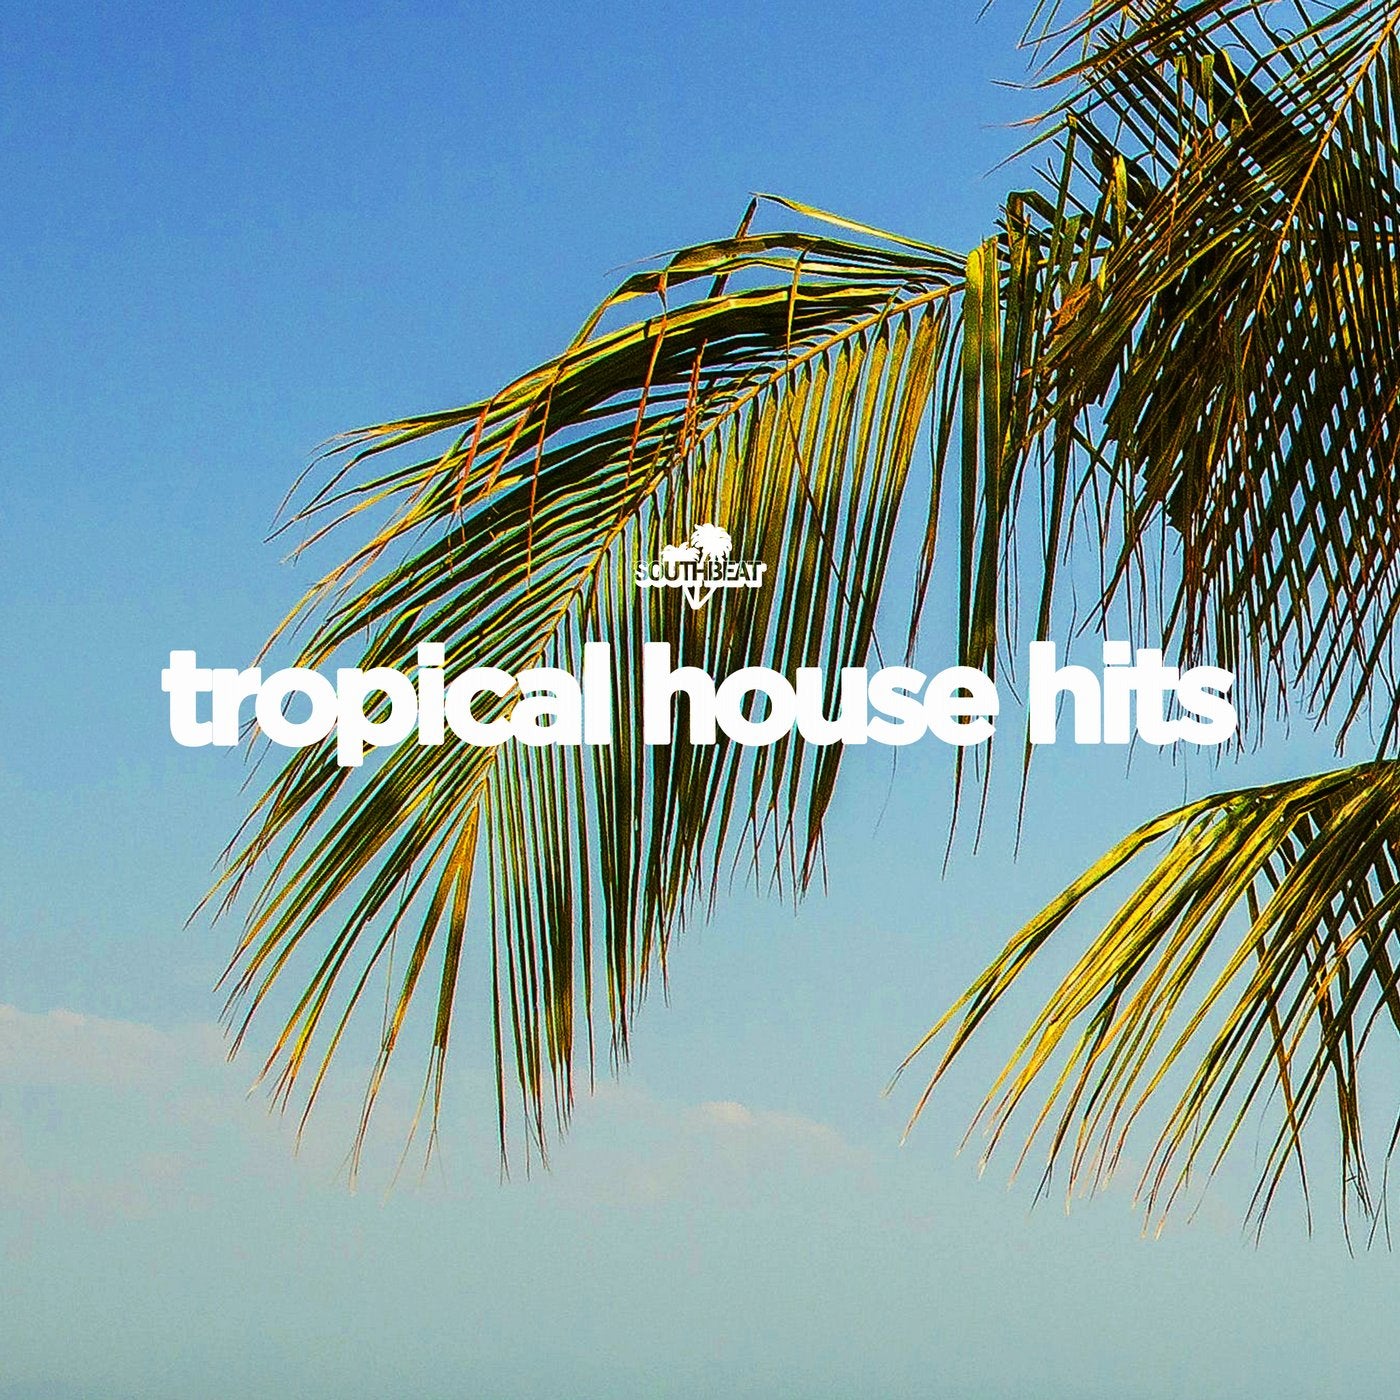 Southbeat Pres: Tropical House Hits